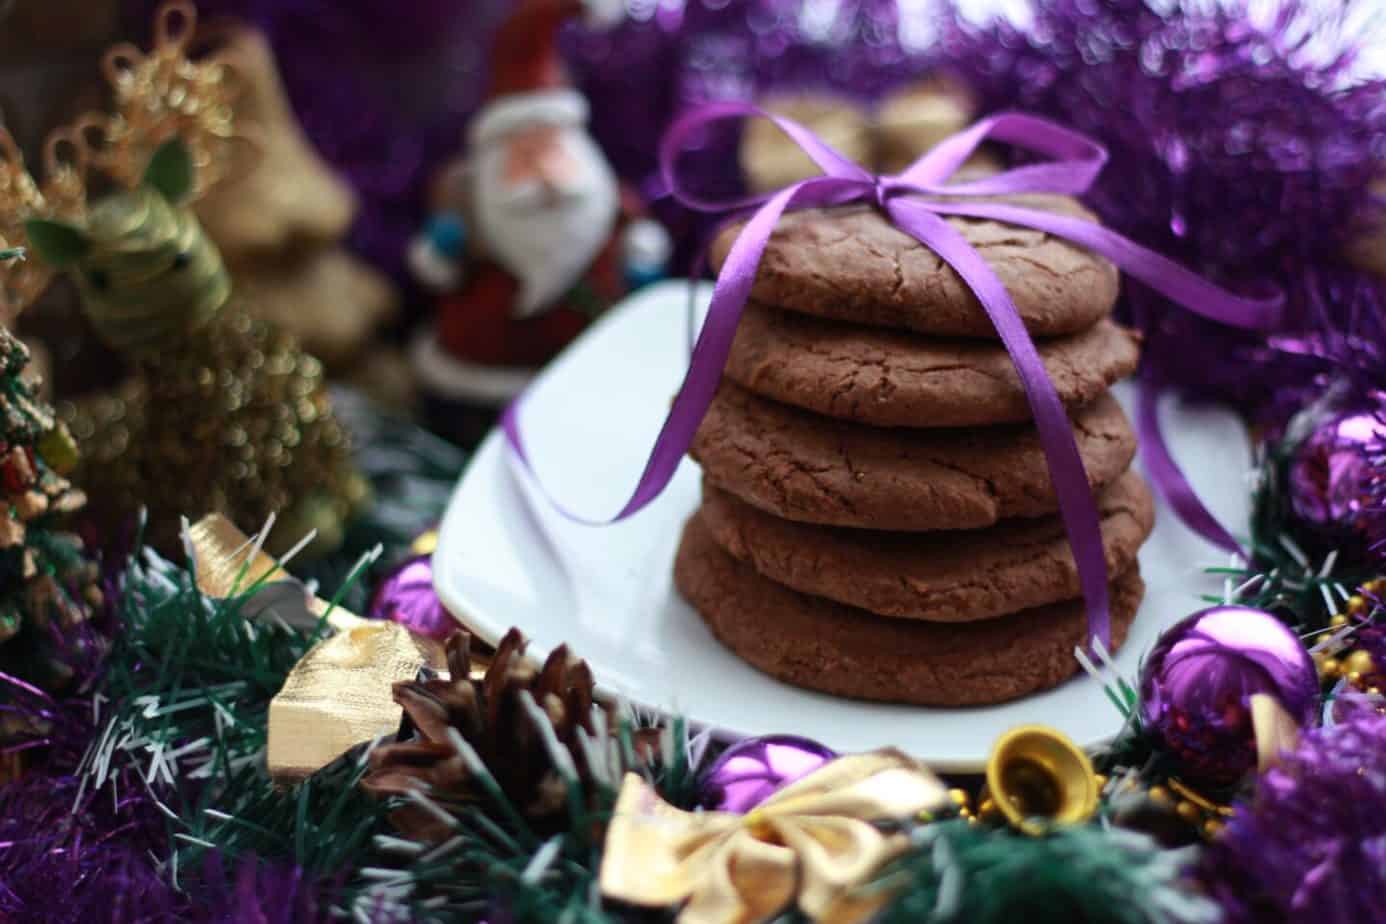 Ways to avoid holiday burnout - Christmas cookies